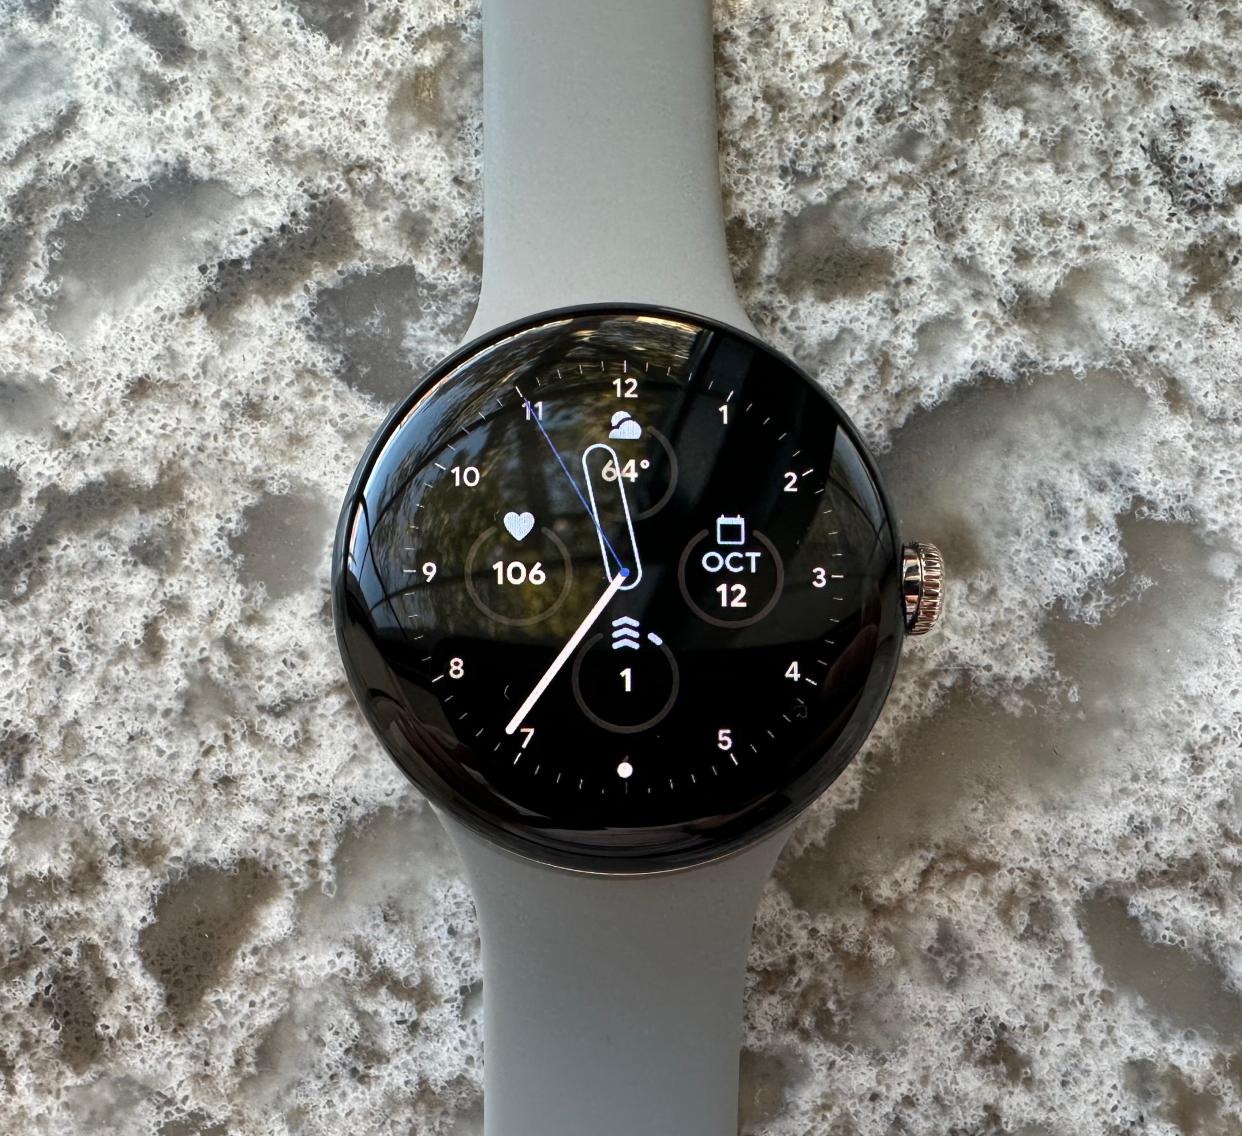 The Pixel Watch has a large bezel around its display, but when using faces like this one, it's almost imperceptible. (Image: Howley)